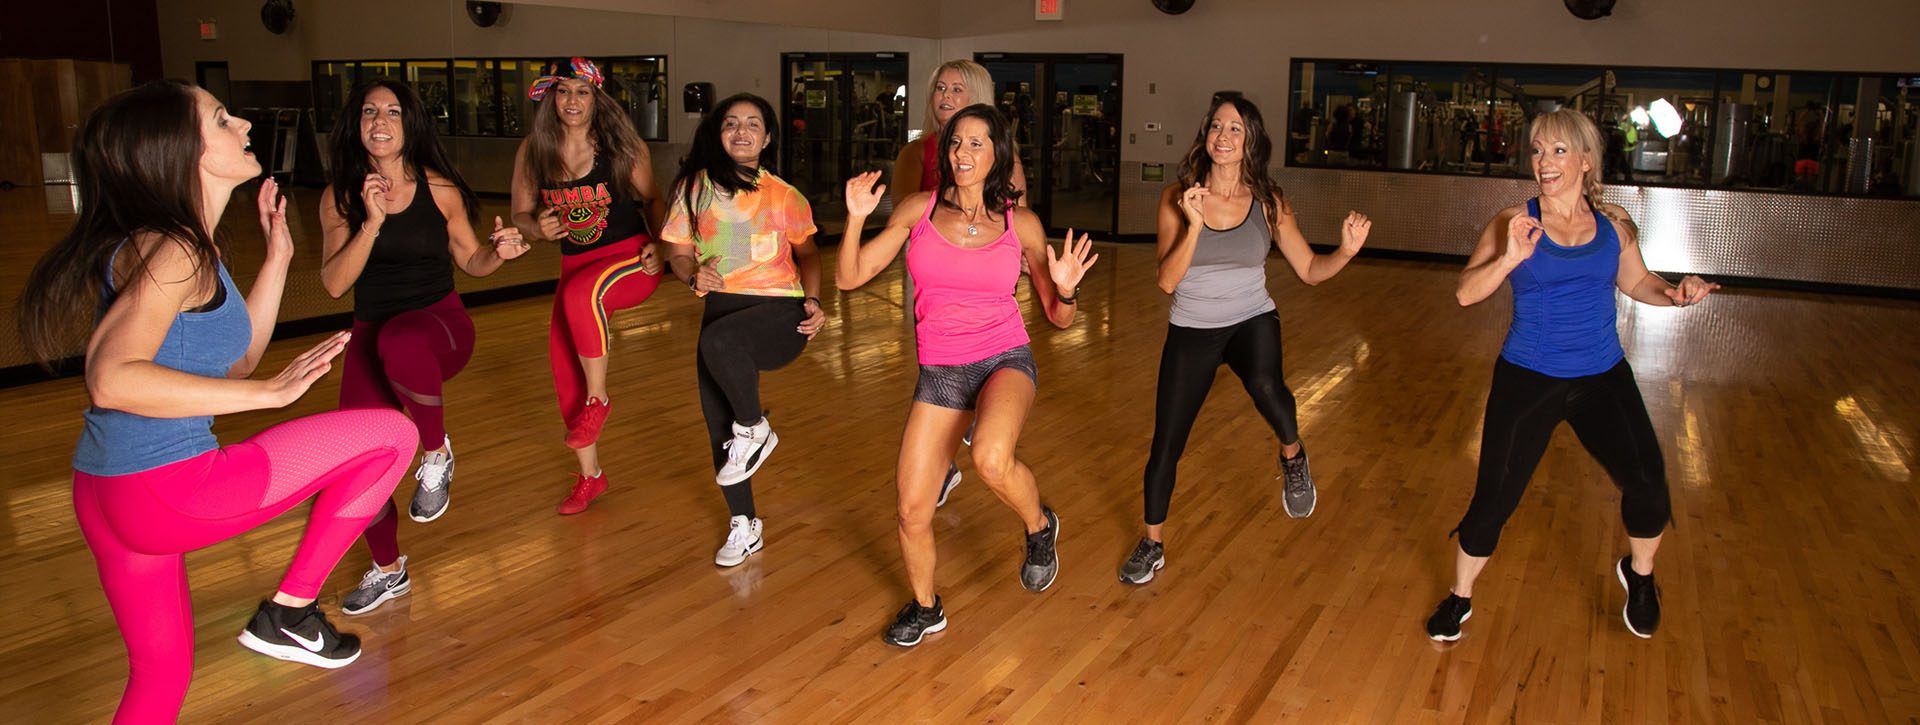 zumba class dancing and working out